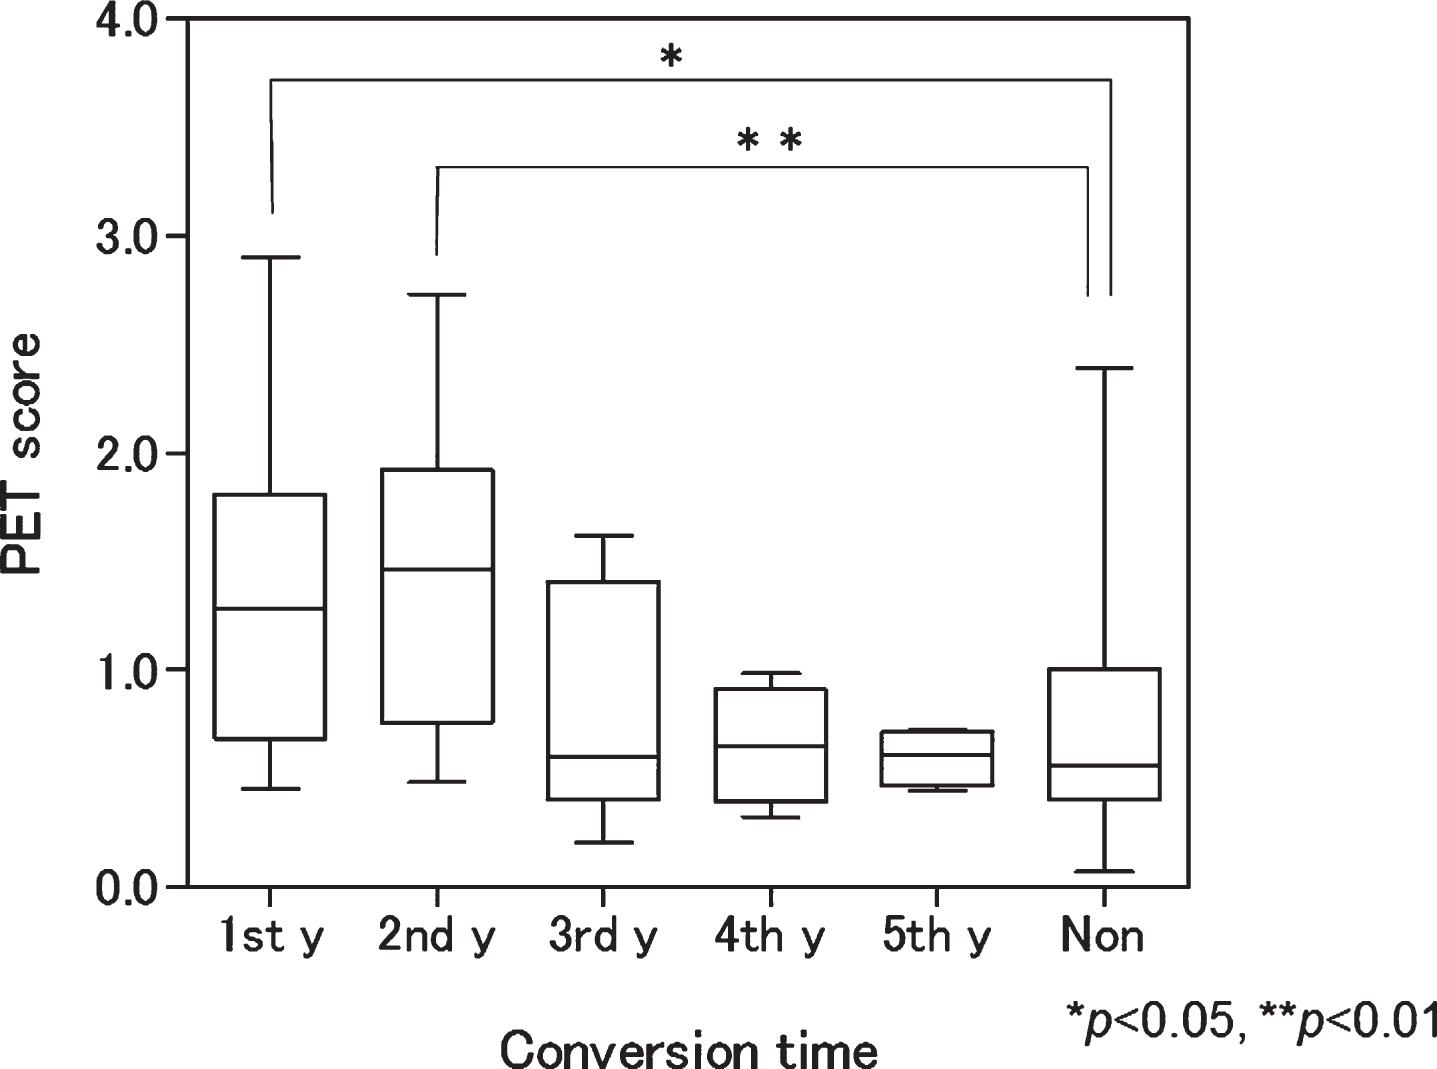 Box plot of baseline positron emission tomography (PET) scores according to conversion time. Patients with mild cognitive impairment progressing to Alzheimer’s disease in the first and second years had significantly higher scores than nonconverters (p < 0.05 and <0.01, respectively). 1st y, first year converter; 2nd y, second year converter; 3rd y, third year converter; 4th y, fourth year converter; 5th y, fifth year converter; Non, nonconverter.